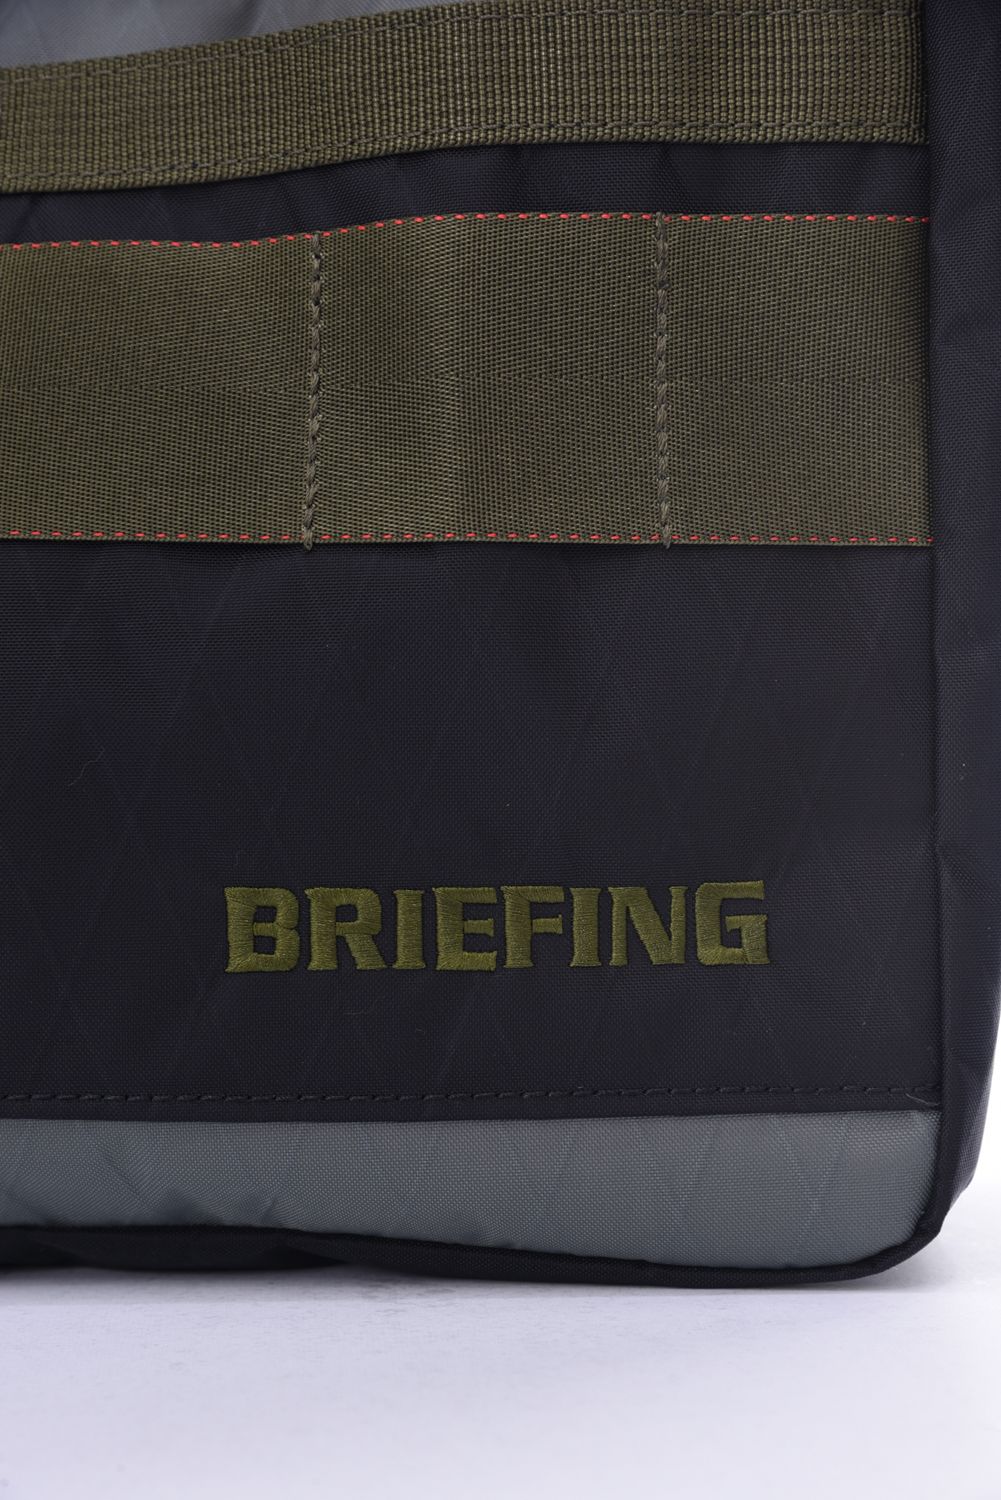 BRIEFING - 【MIL COLLECTION】 CLASSIC CART TOTE XP RANGER GREEN